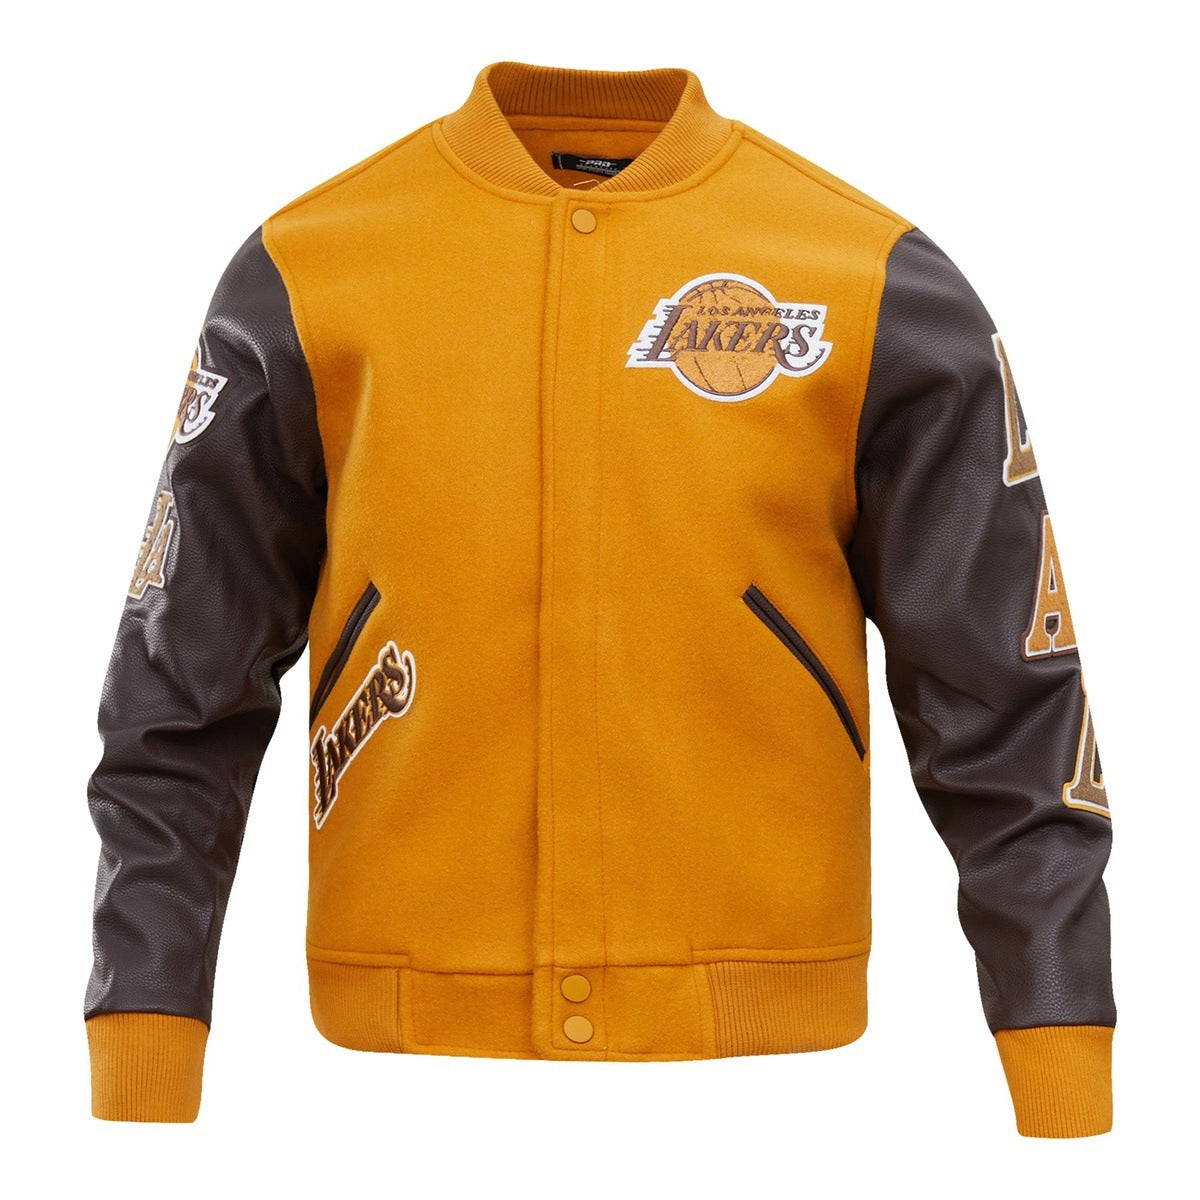 Los Angeles Lakers Nike Jacket, Lakers Pullover, Los Angeles Lakers Varsity  Jackets, Fleece Jacket